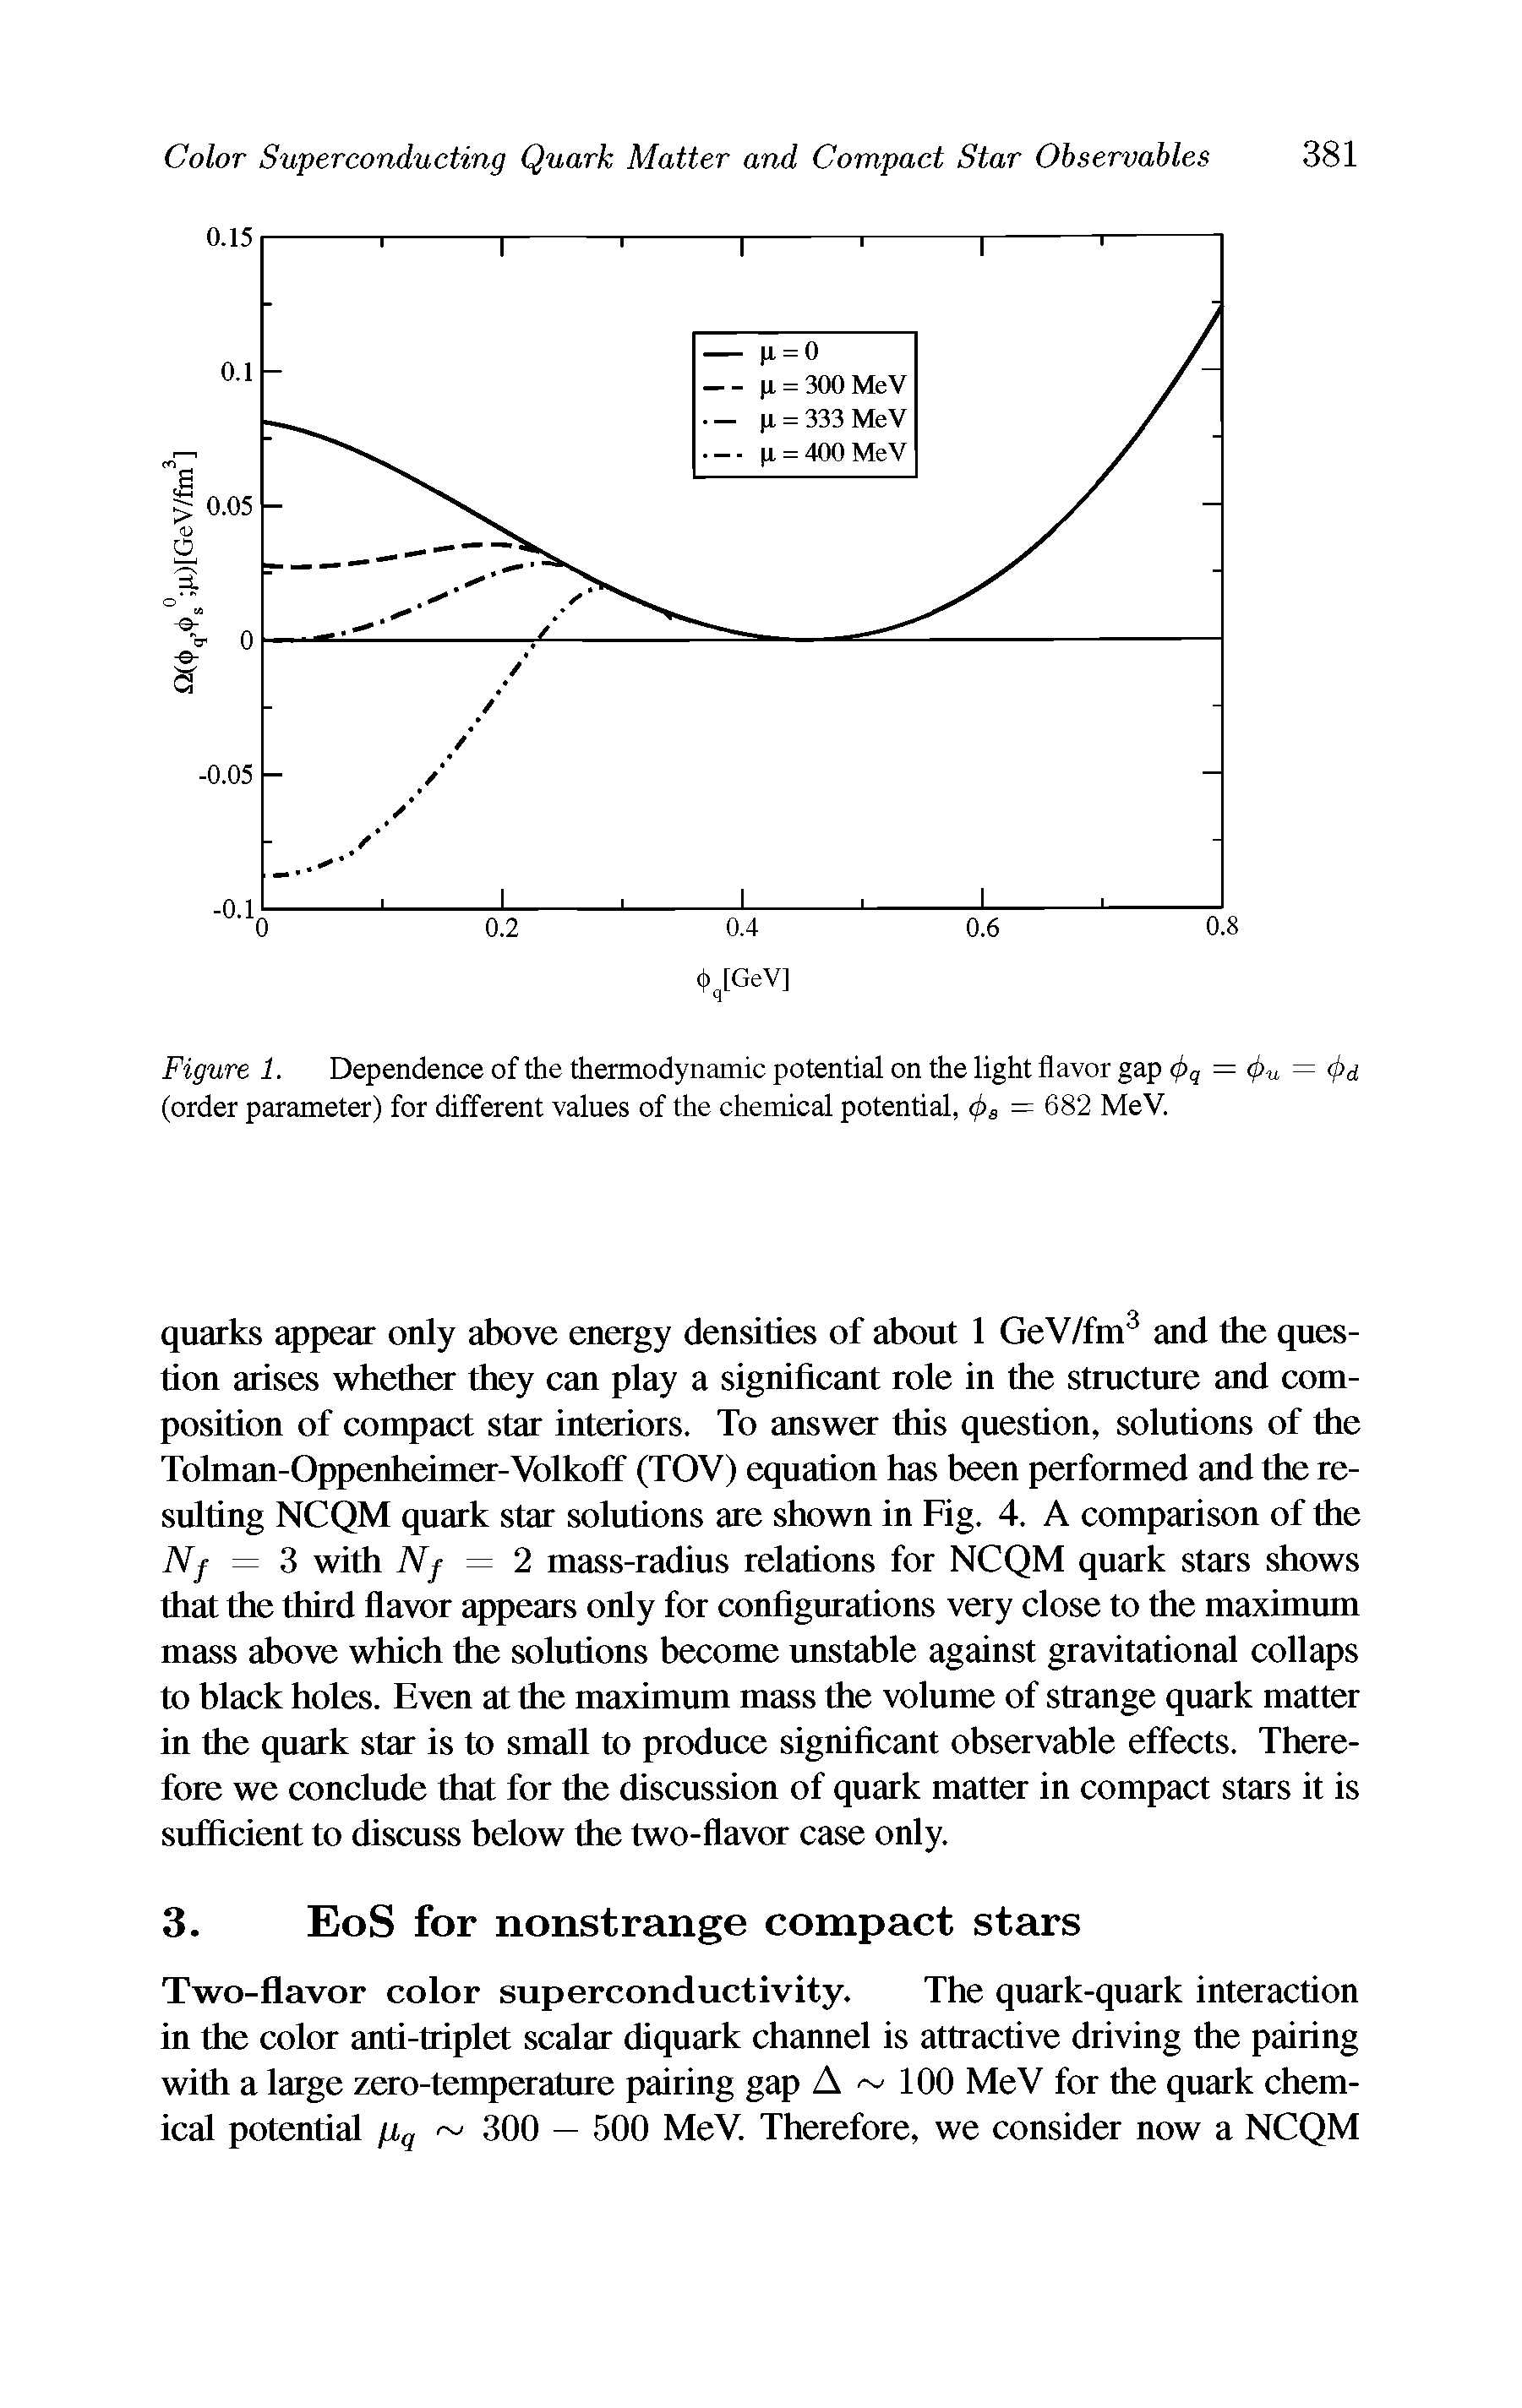 Figure 1. Dependence of the thermodynamic potential on the light flavor gap <f>q = 4>u = 4>d (order parameter) for different values of the chemical potential, 4>s = 682 MeV.